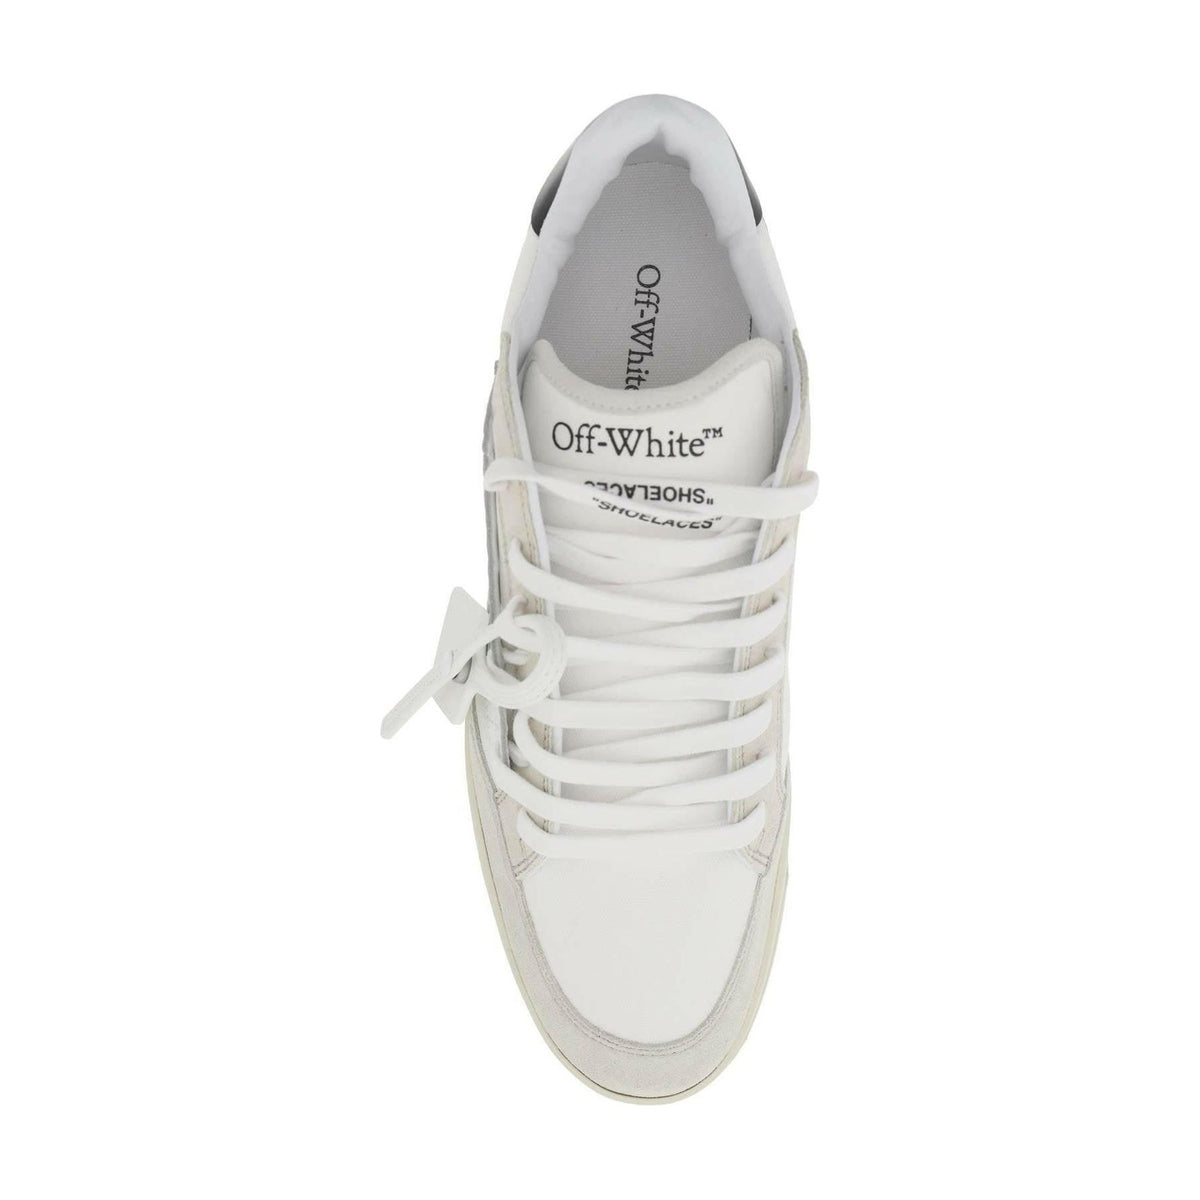 OFF-WHITE - White 5.0 Canvas and Suede Sneakers - JOHN JULIA